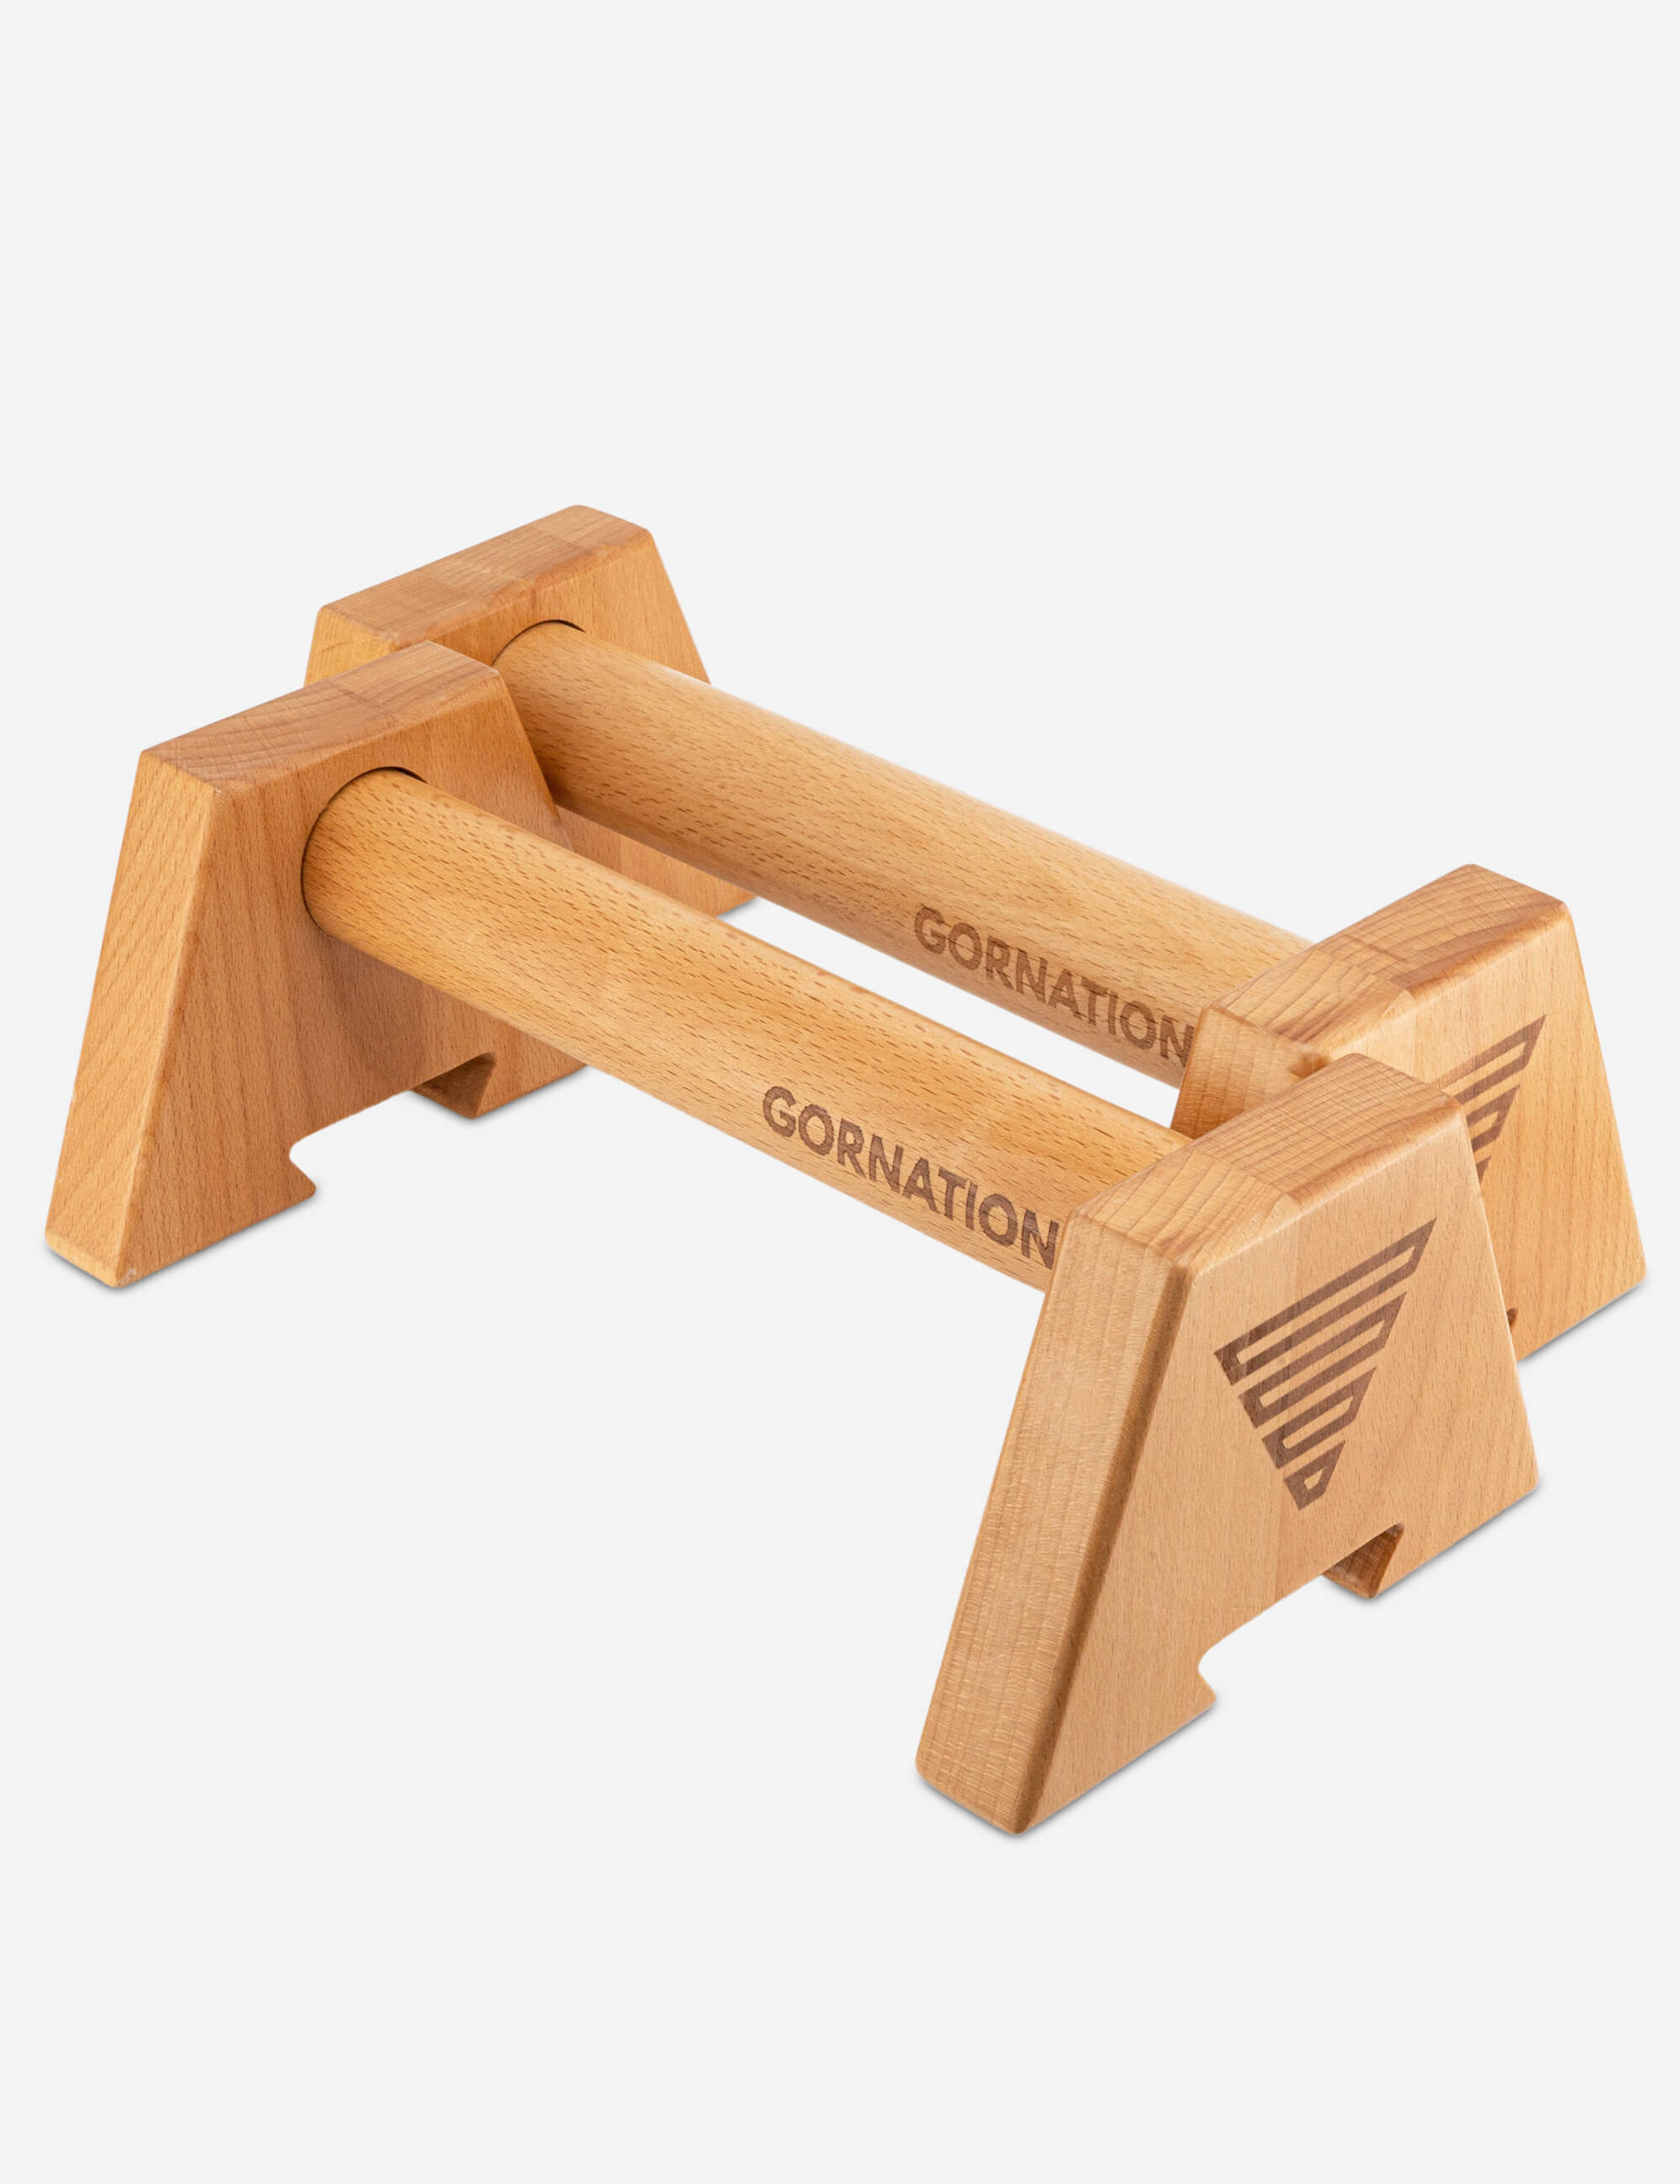 High Quality Wooden Parallettes